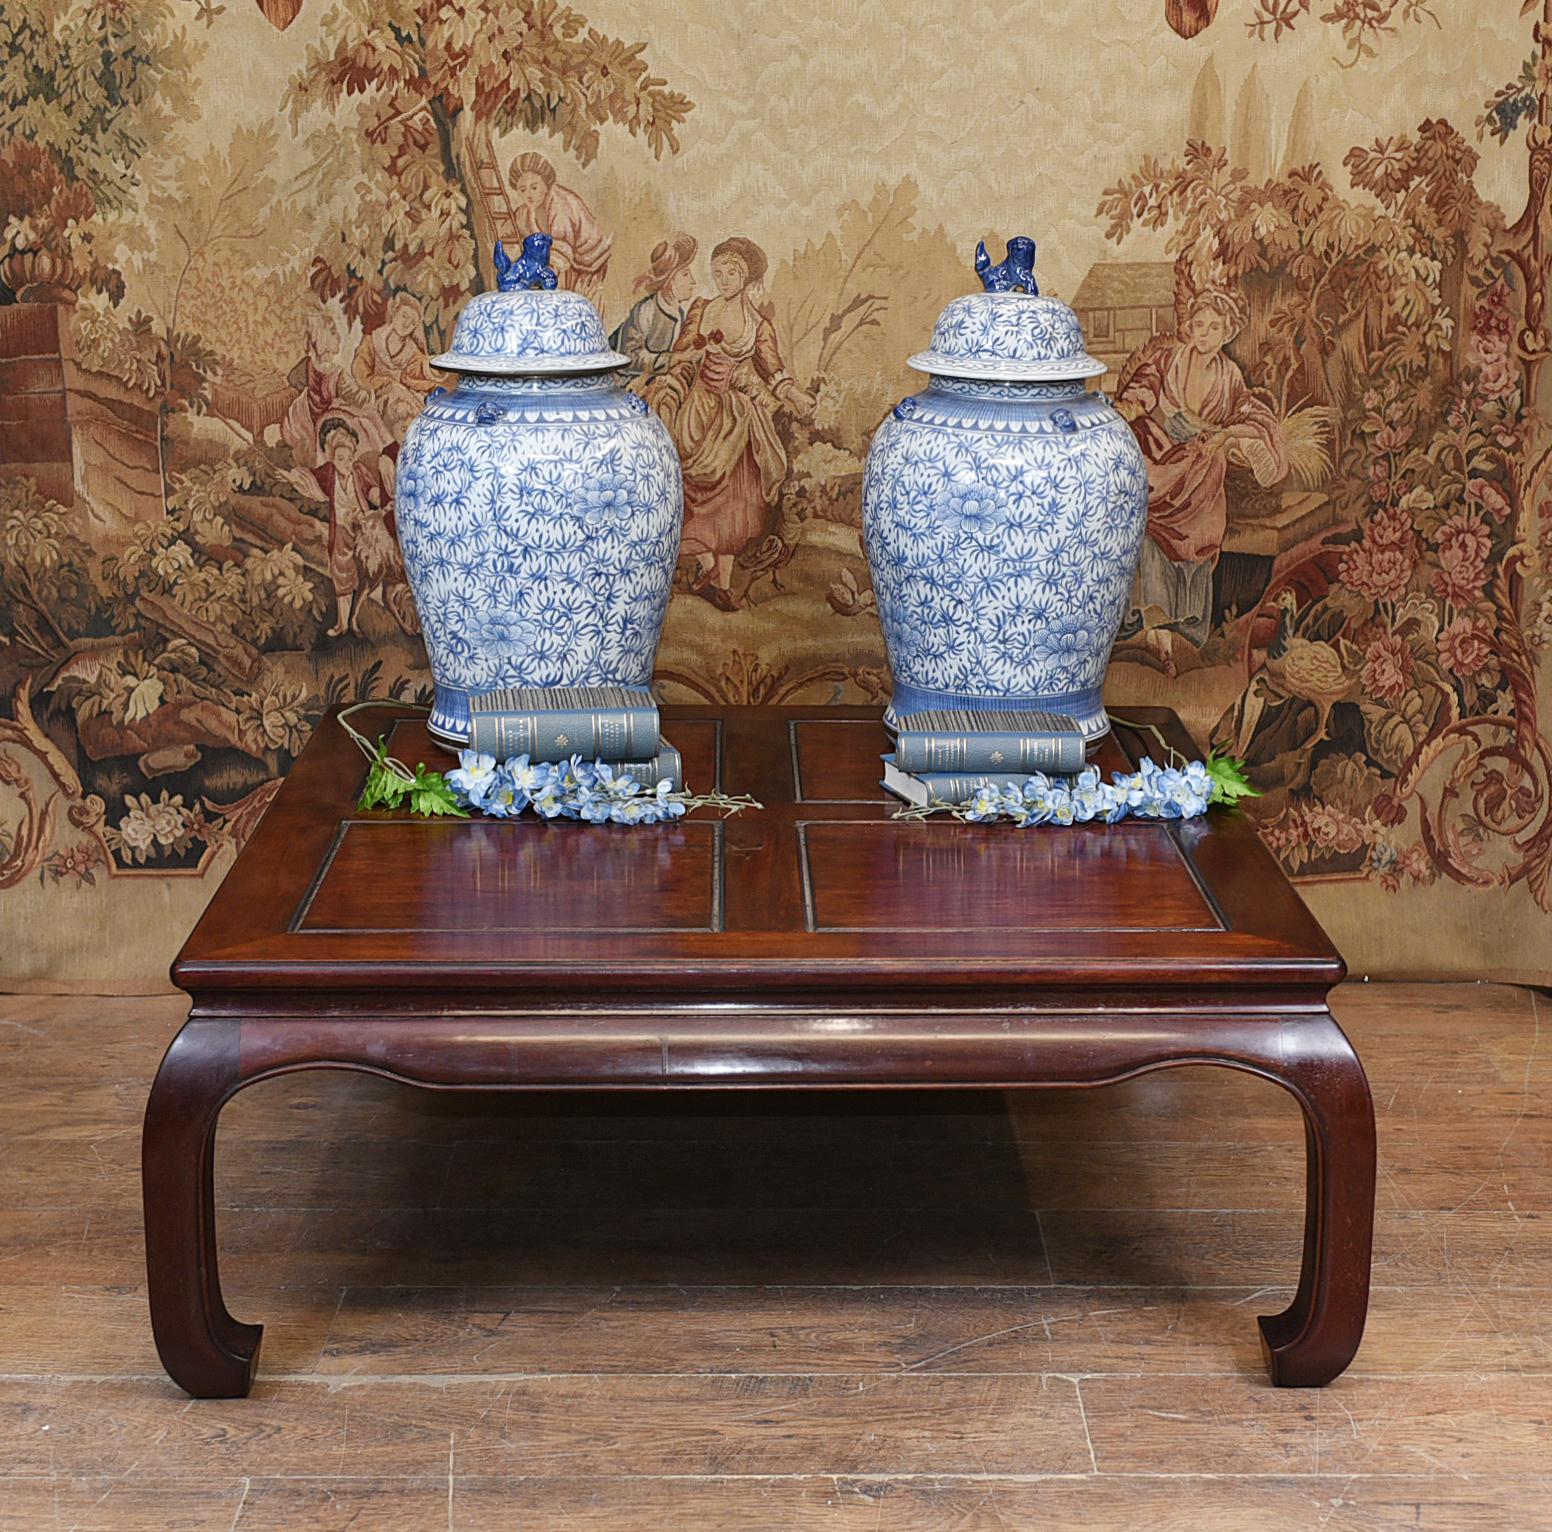 Gorgeous antique Chinese coffee table in hardwood
Clean design great for modern interiors
Circa 1930
Blue and white porcelain urns available but not included
Viewings available by appointment
Offered in great shape ready for home use right